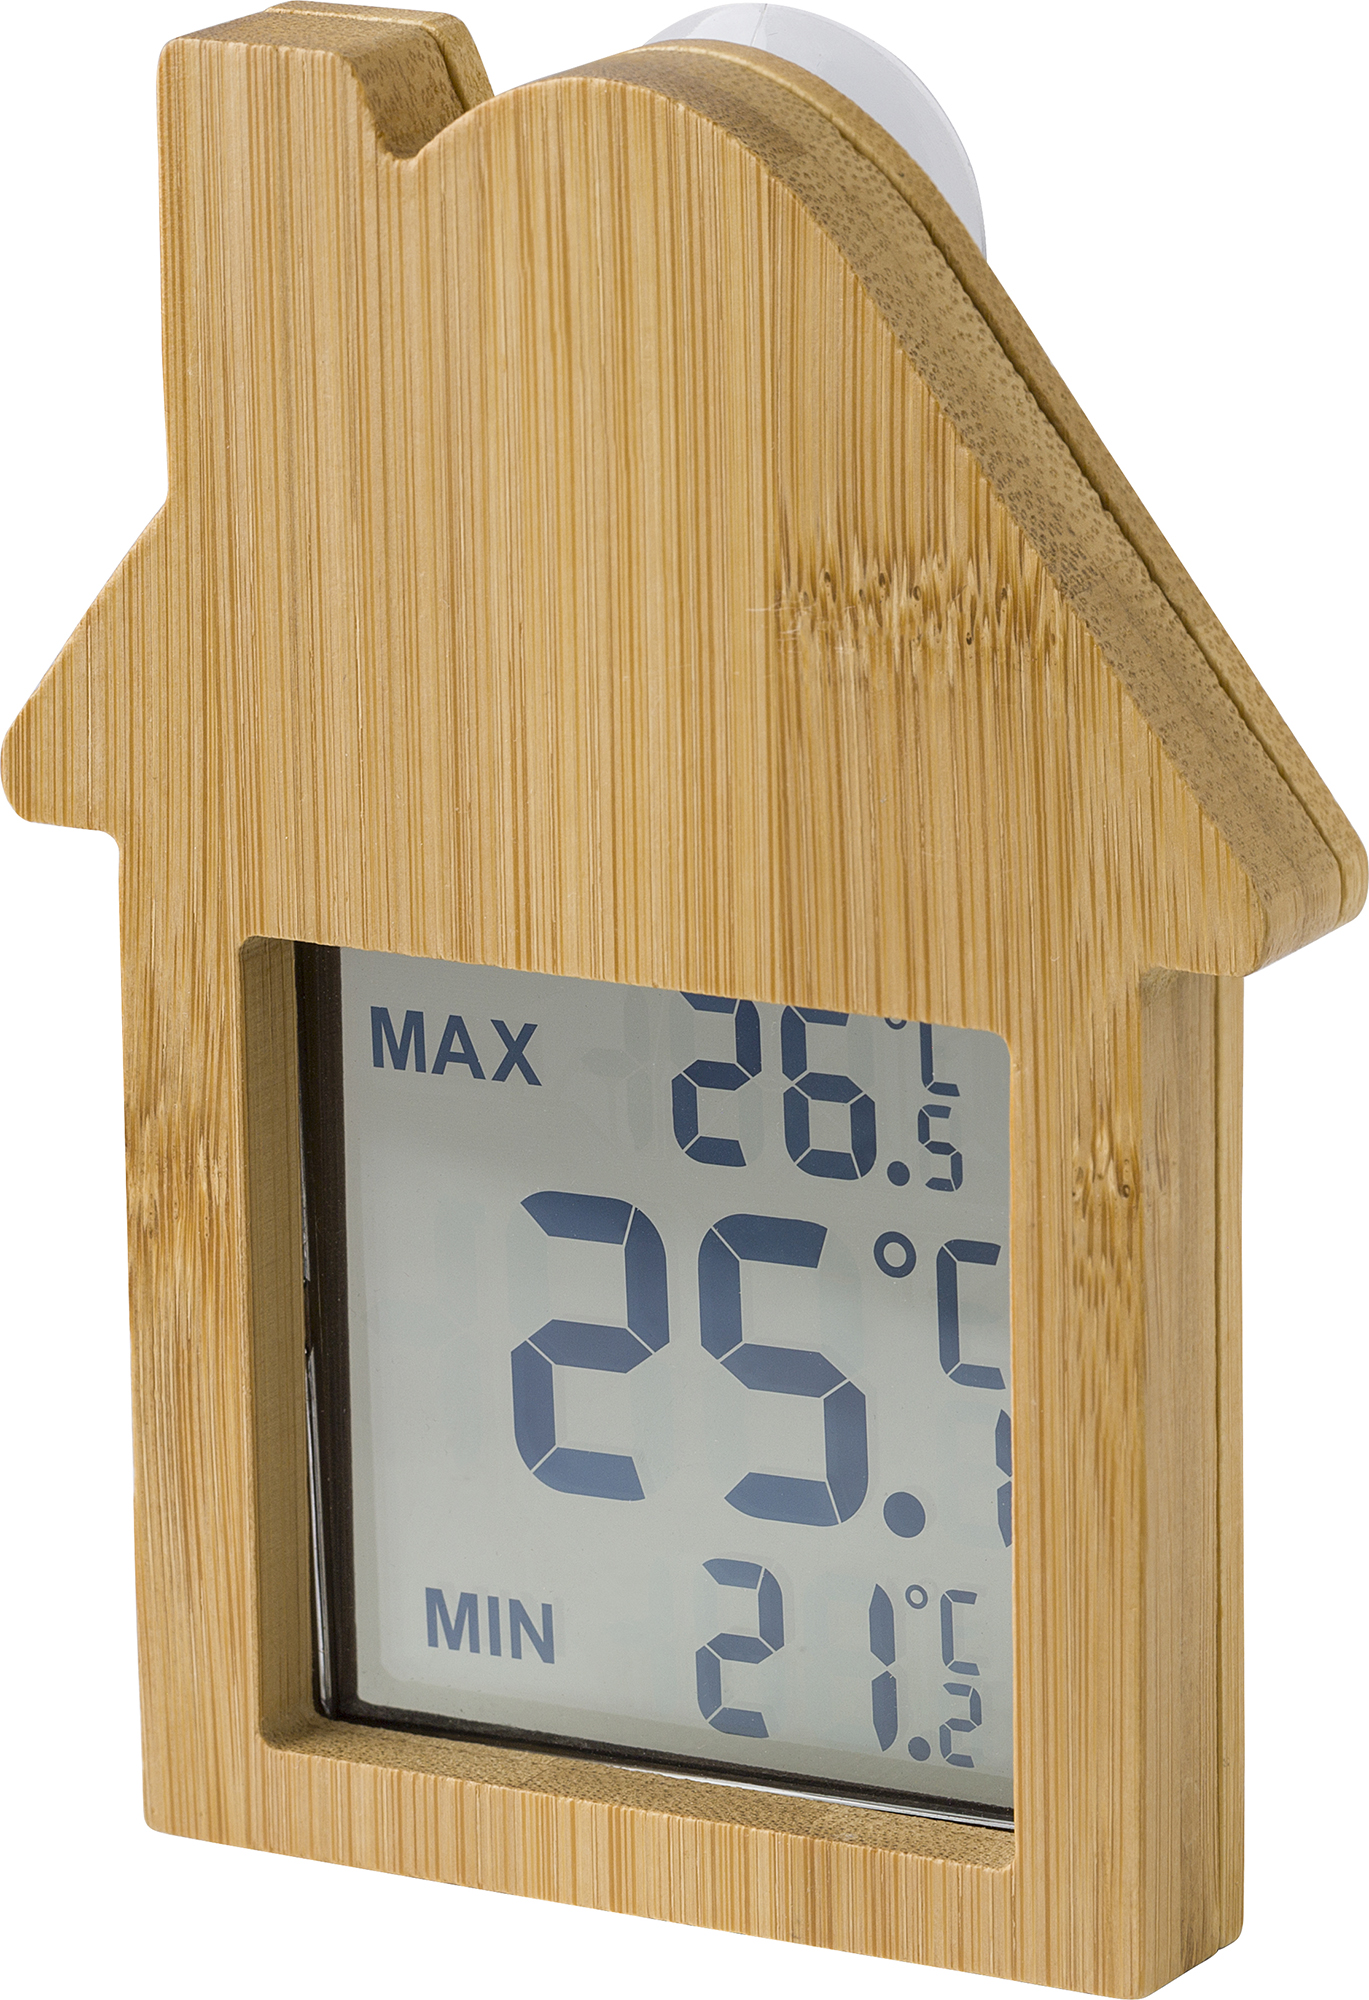 000000966192 011999999 3d045 rgt pro01 2023 fal - Bamboo weather station